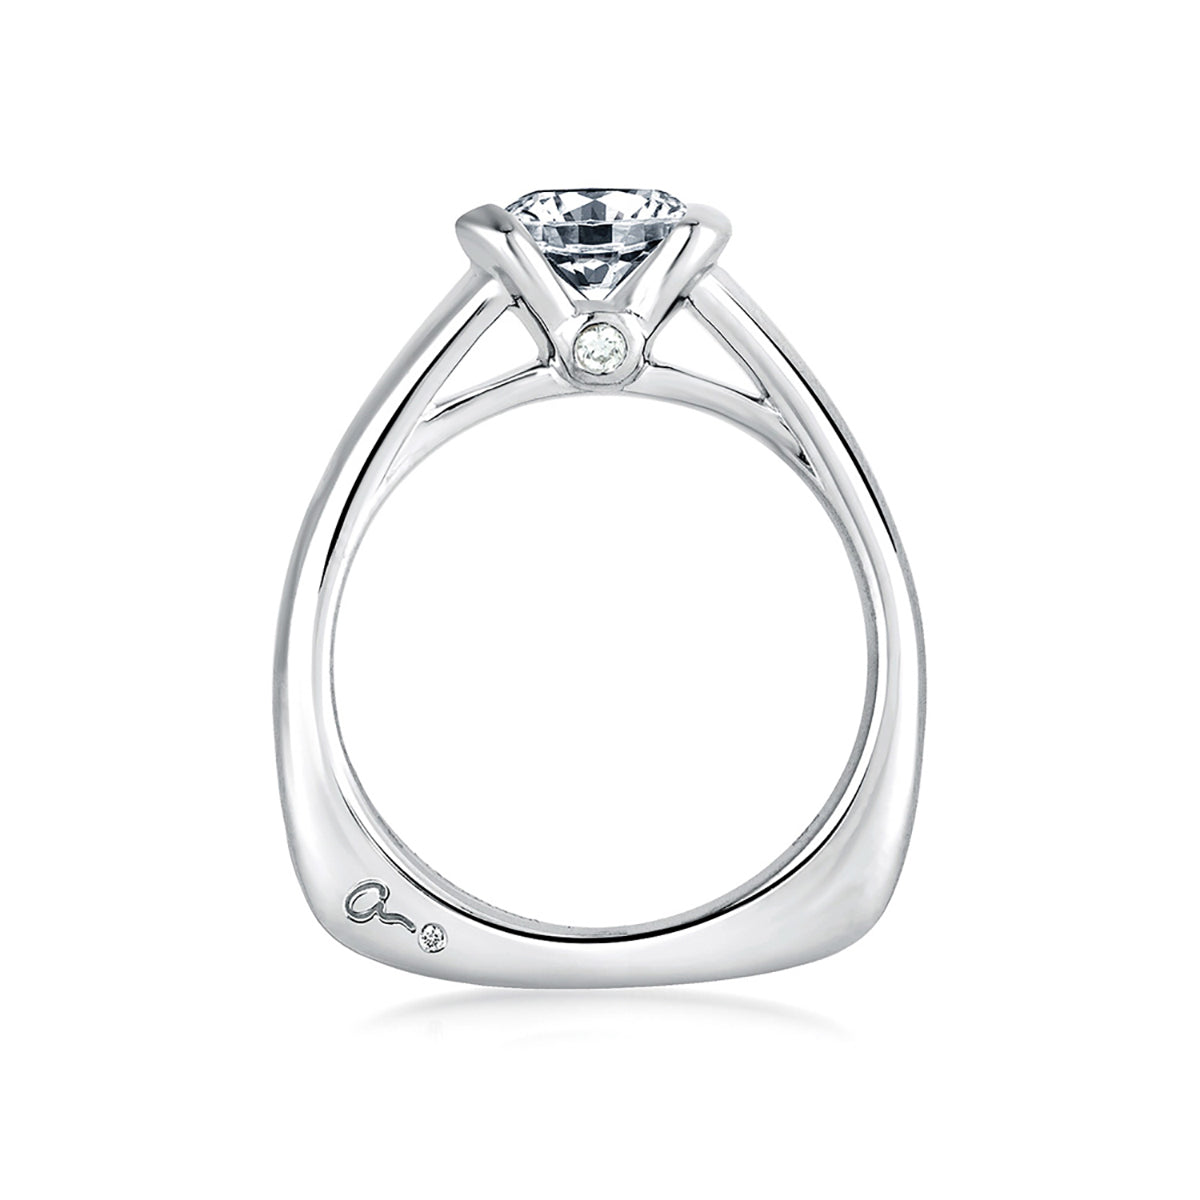 A.Jaffe Classic Half Bezel with Profile Diamond Solitaire Ring MES399/77